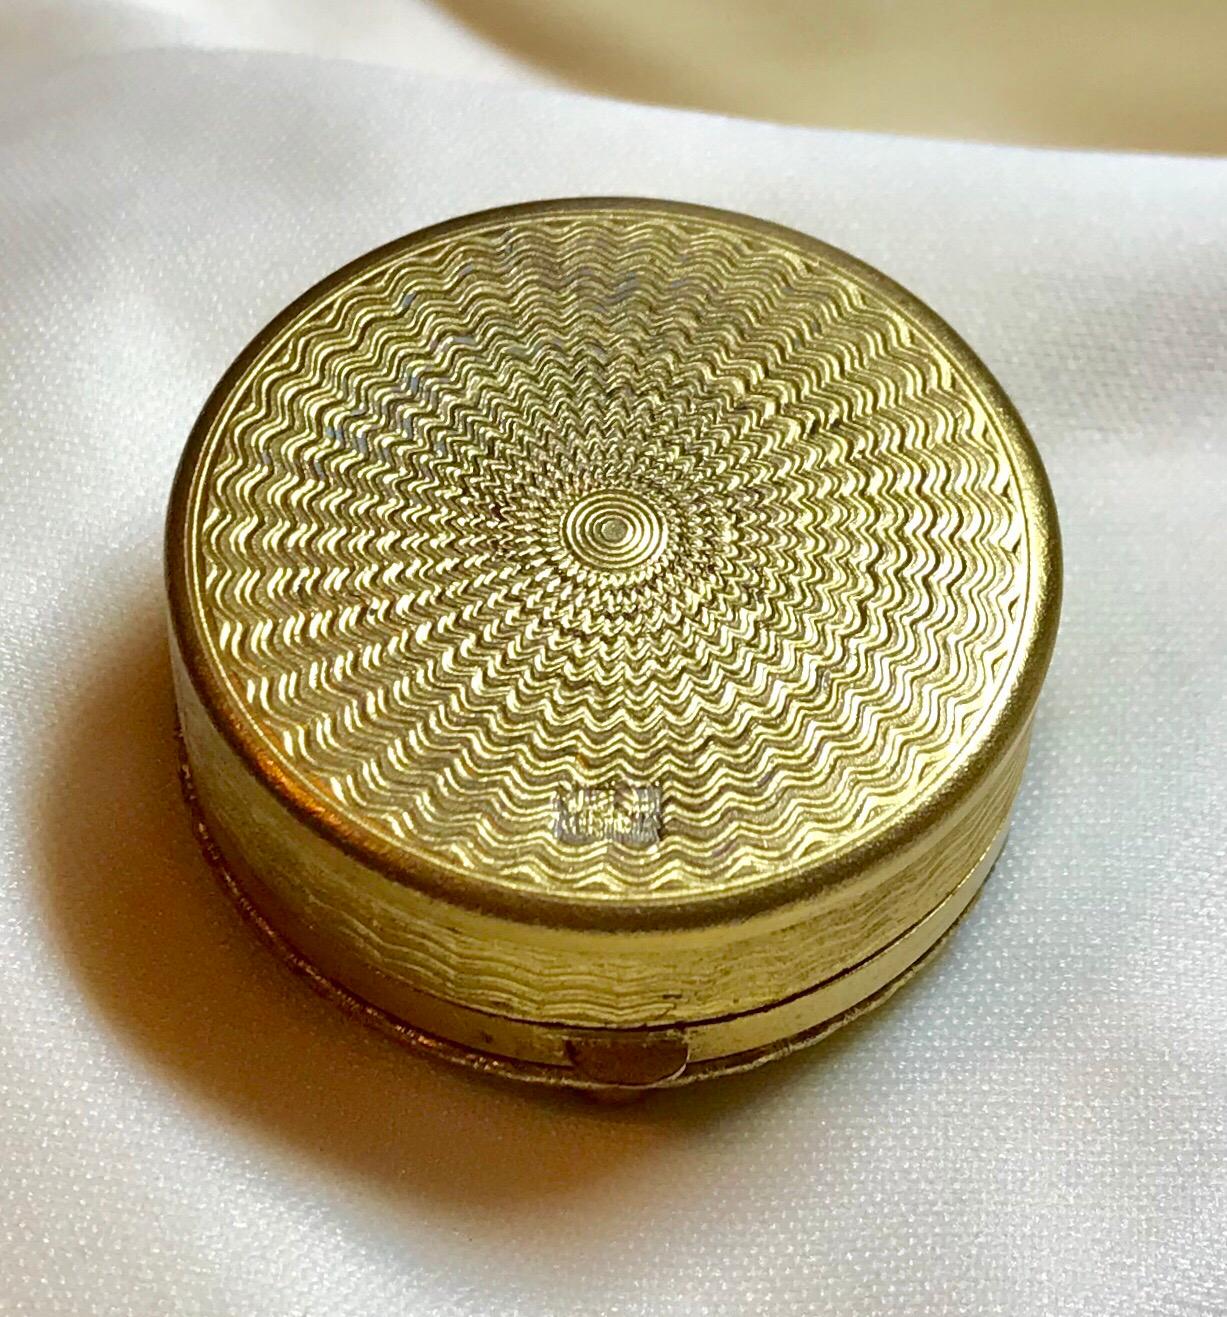 Circa 1920s Austrian Jeweled and Enameled Powder Compact  In Good Condition For Sale In Long Beach, CA